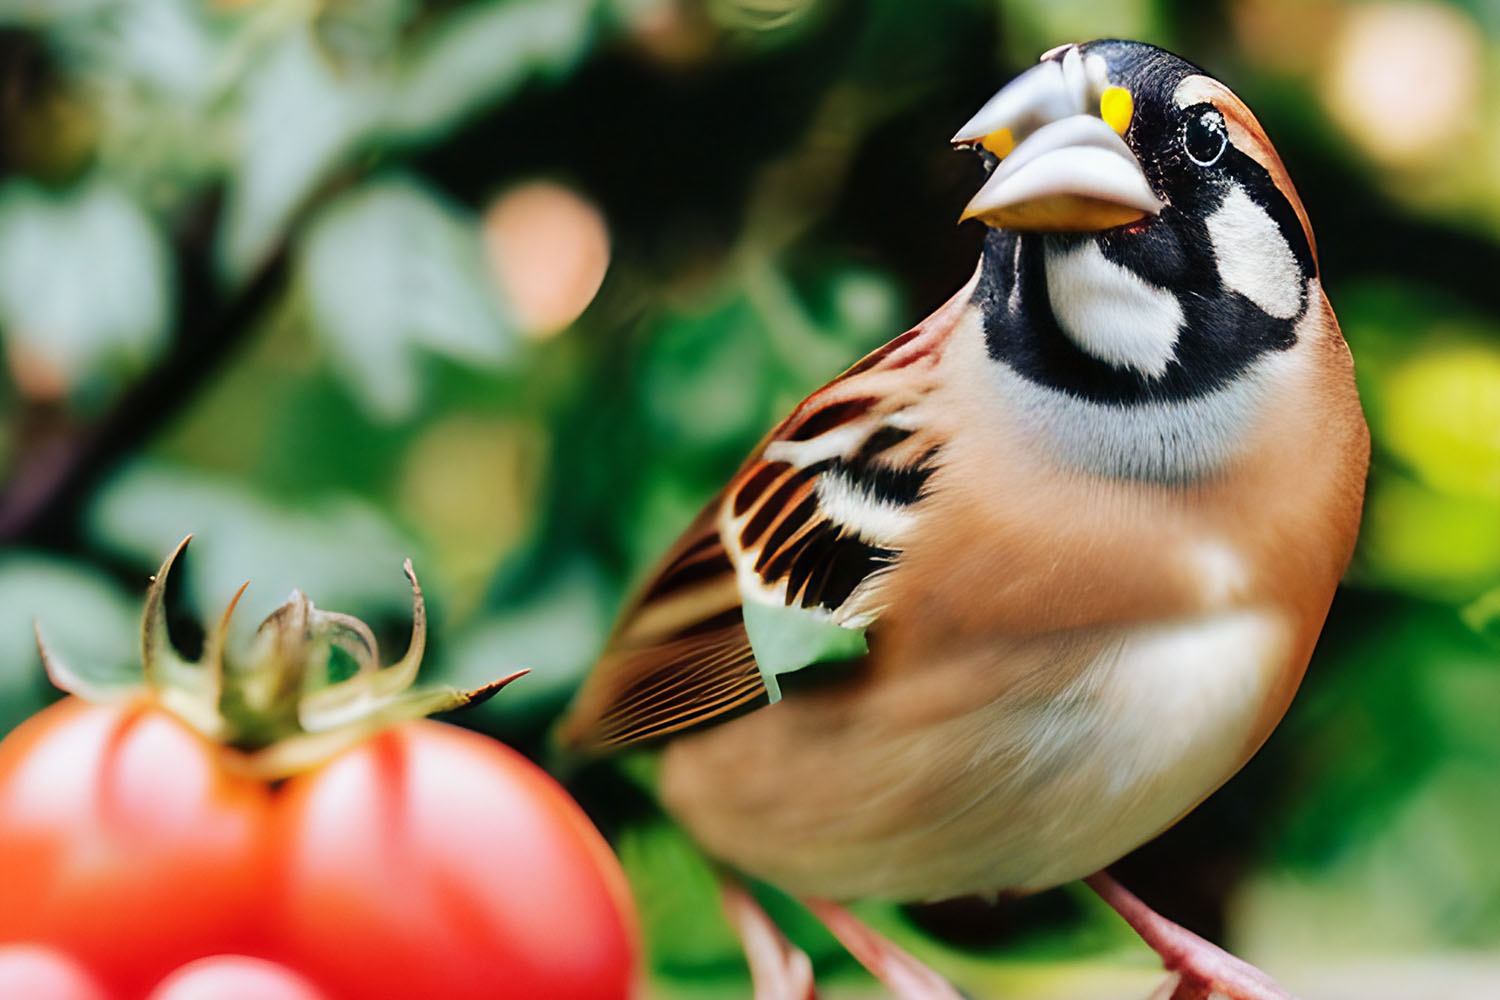 The Best Way To Protect Your Tomato Plants From Birds